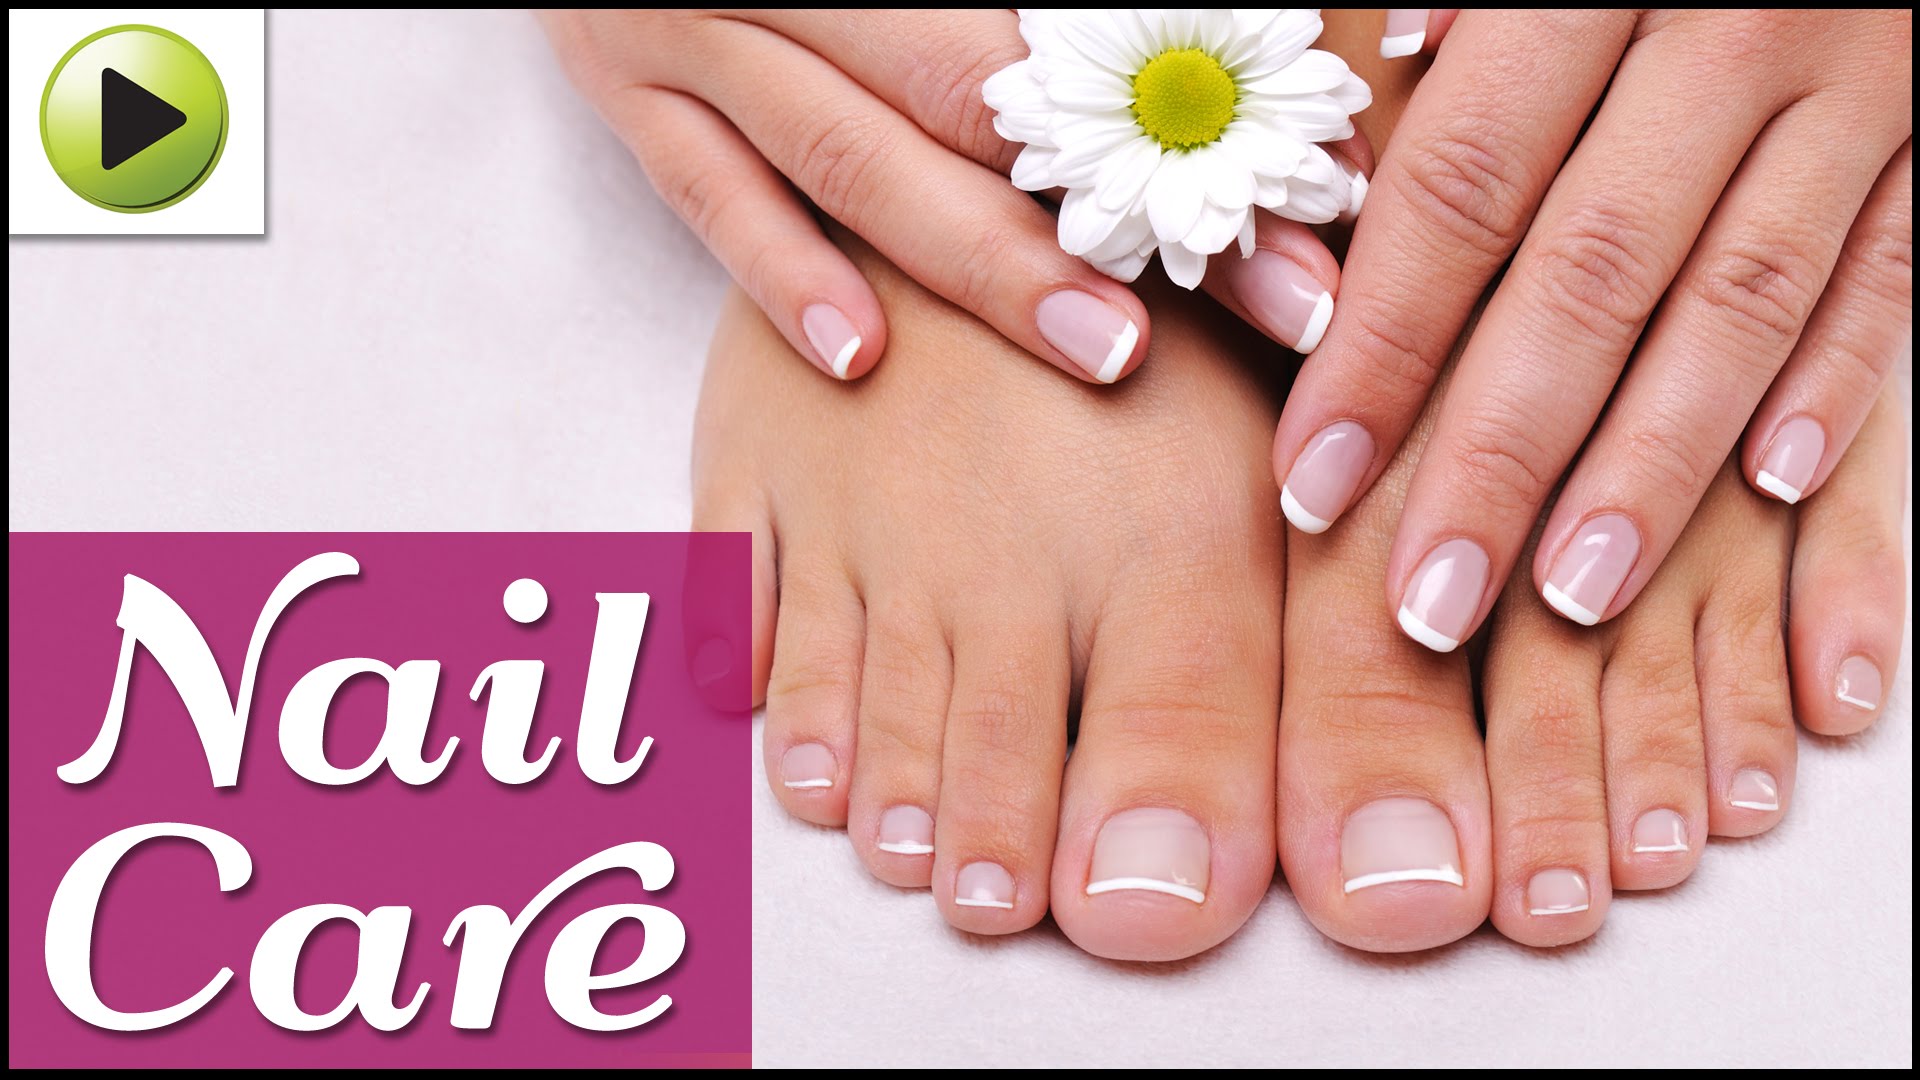 9. Natural Nail Care Remedies - wide 4